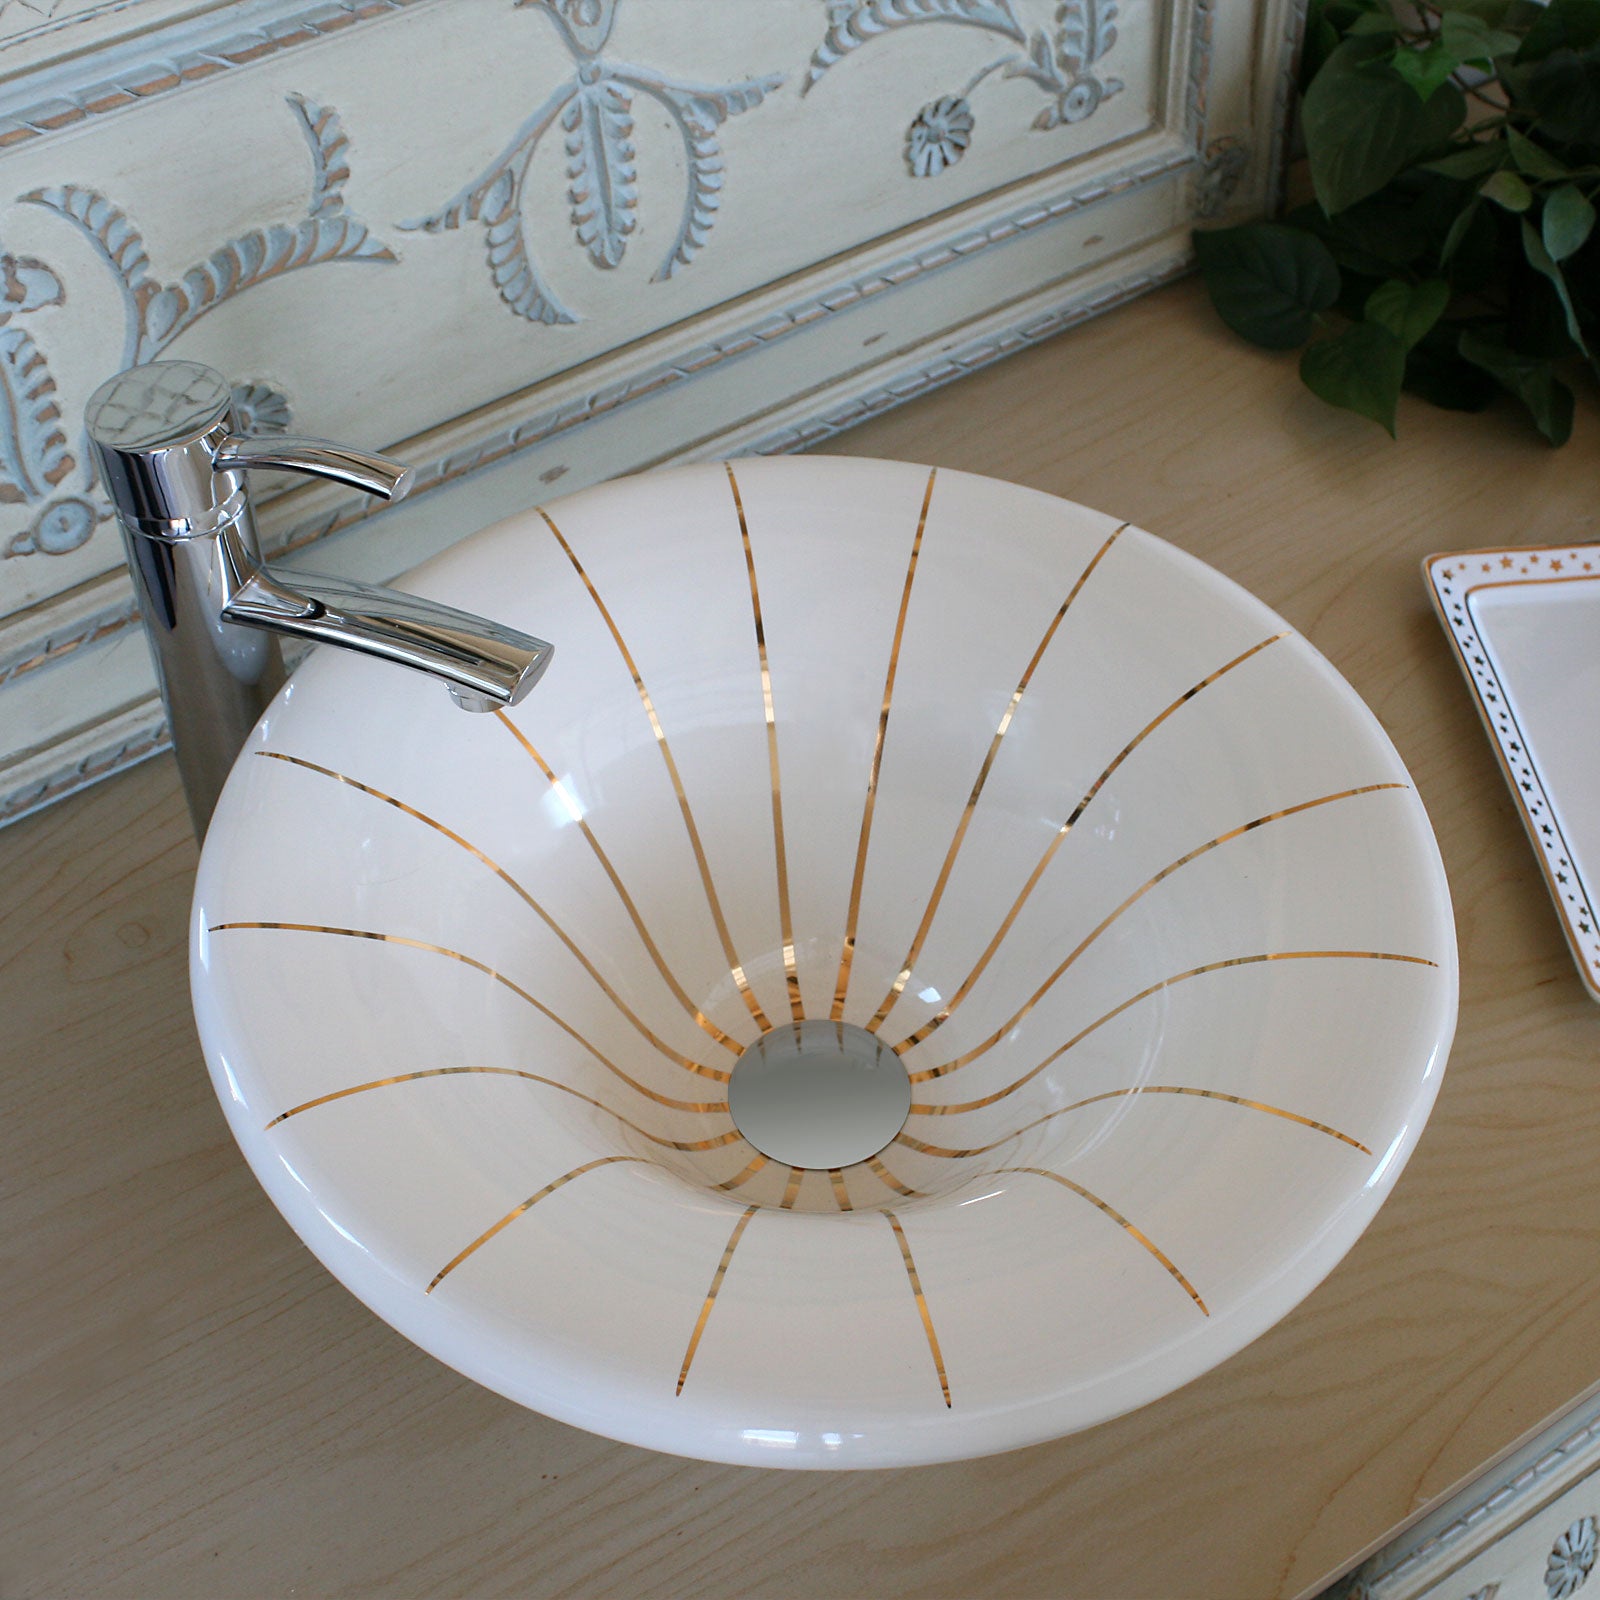 French provincial powder room with gold lines painted on vessel wash basin